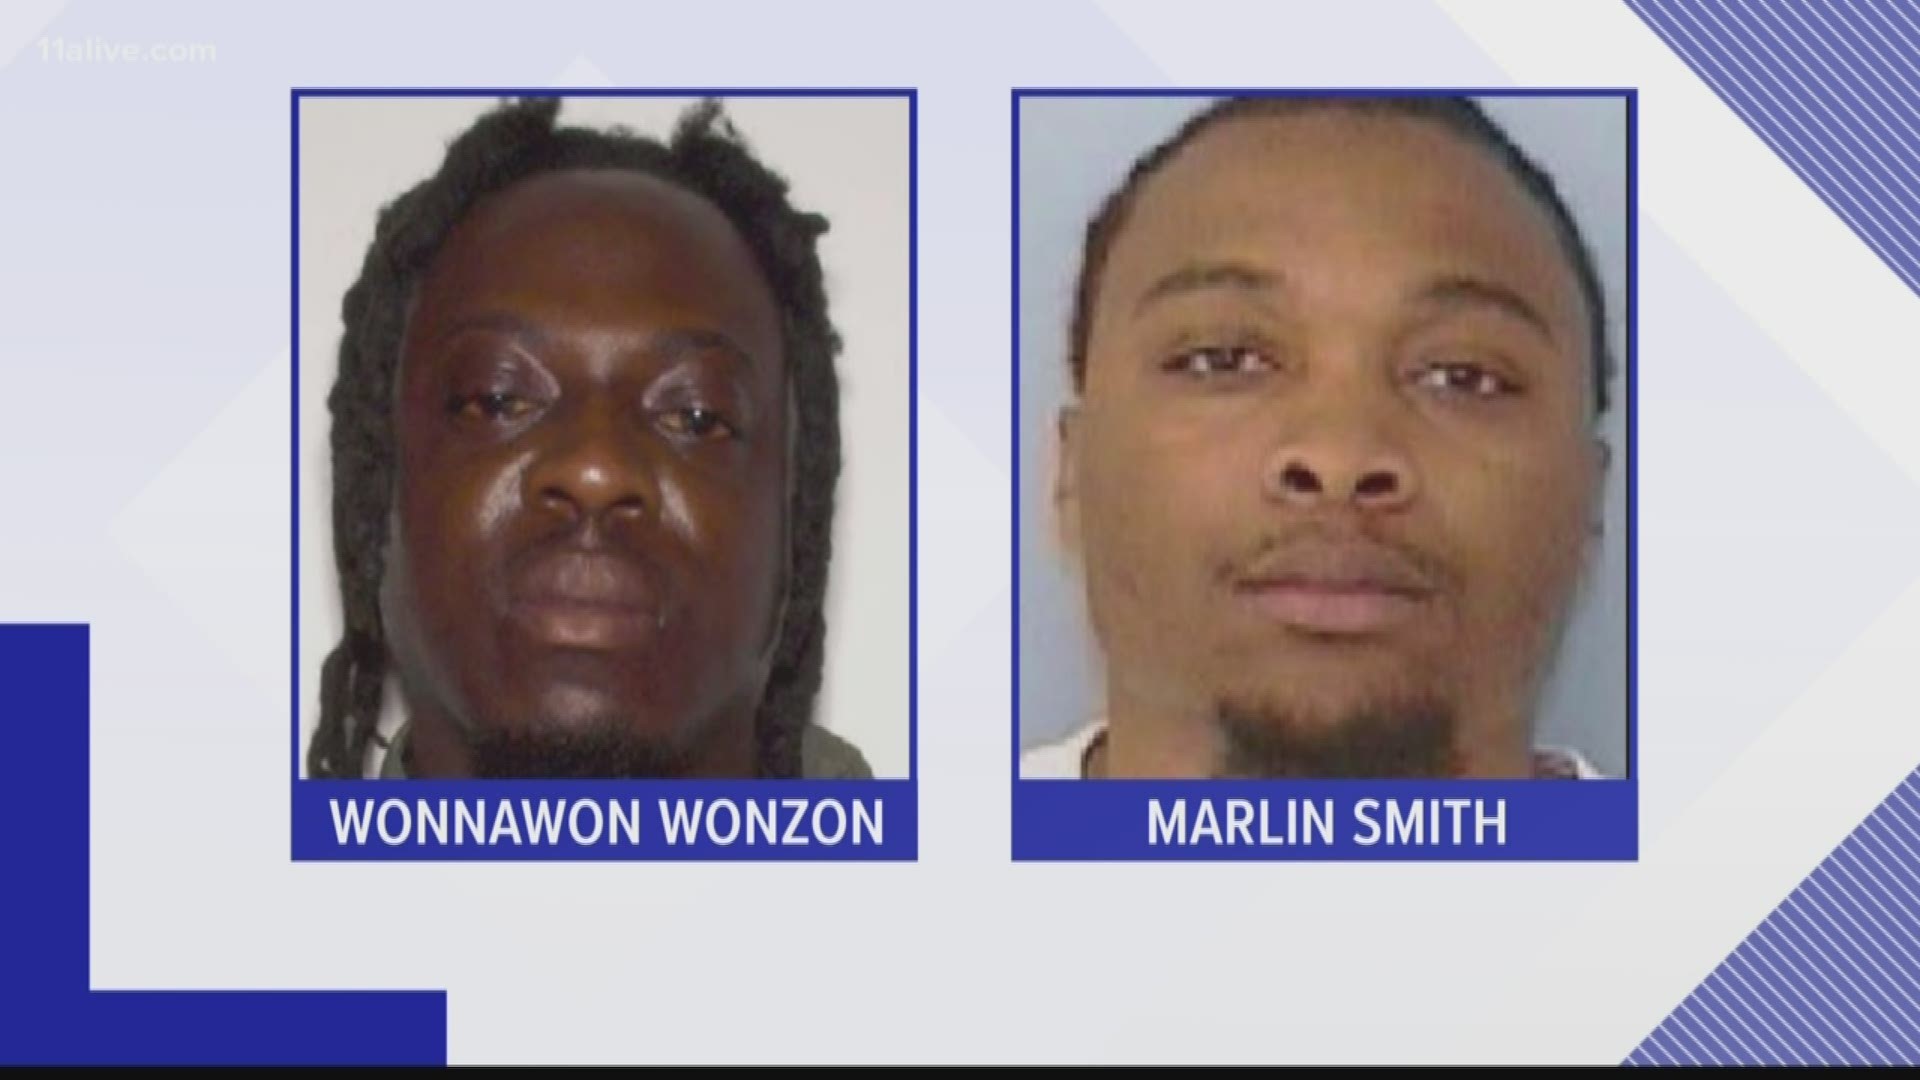 Investigators said the street gang has been active in metro Atlanta for more than 10 years, and are responsible for several crimes.